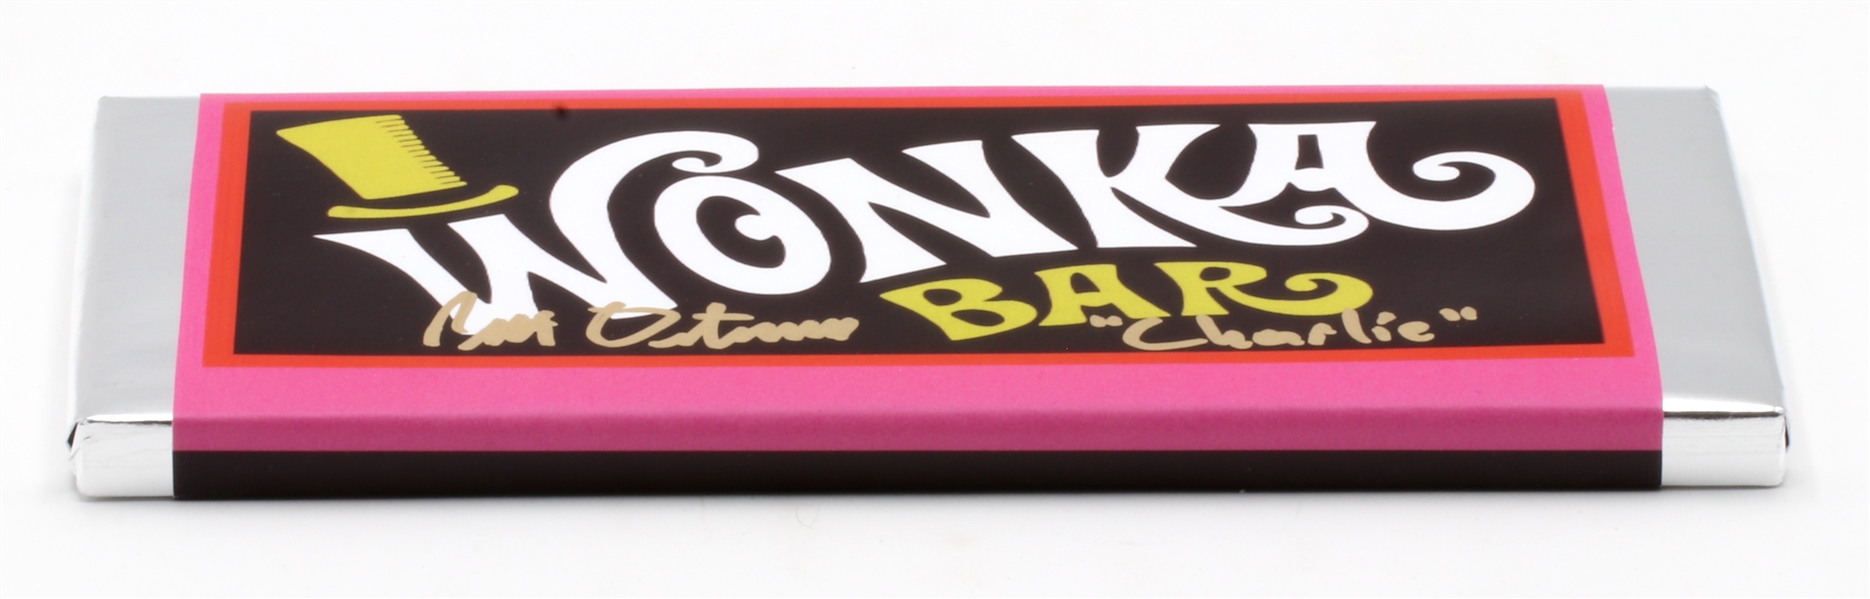 Wonka Bar Signed by Peter Ostrum (Charlie) from the Movie Willy Wonka & the Chocolate Factory (JSA)